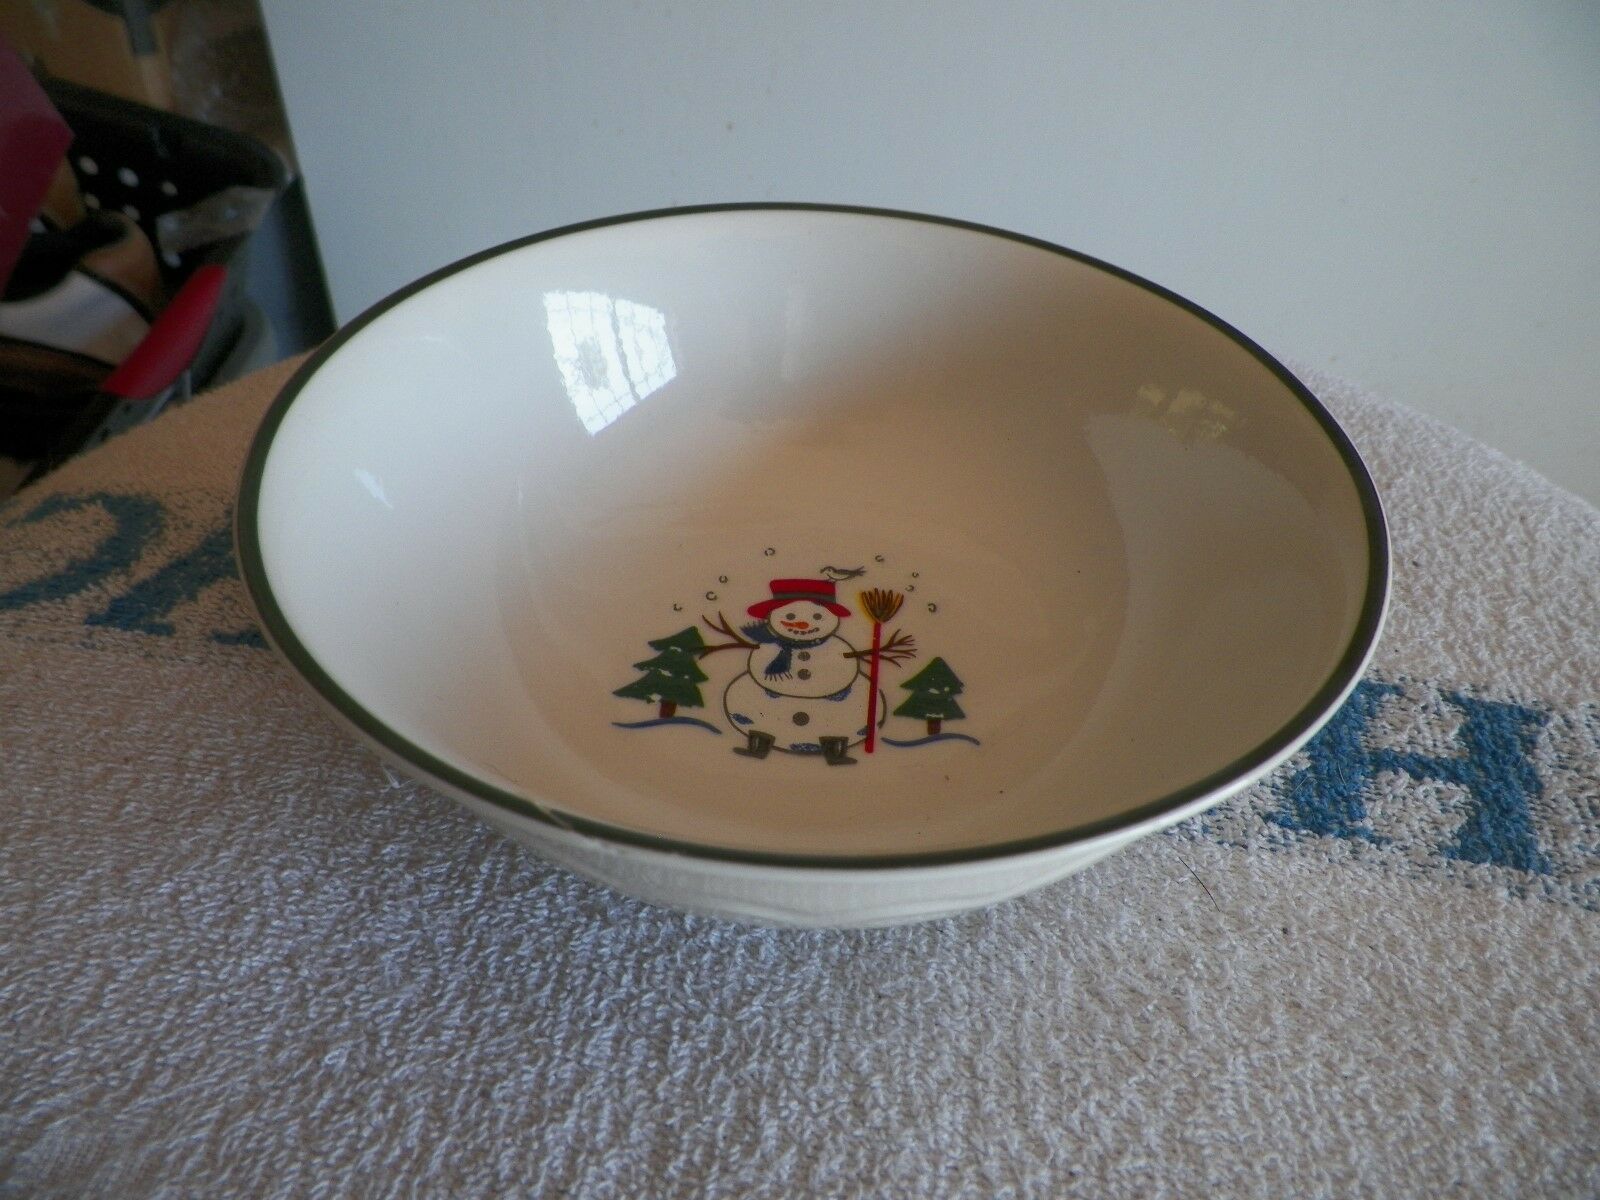 Pfaltzgraff Snow Village soup/cereal bowl 14 available - $3.91